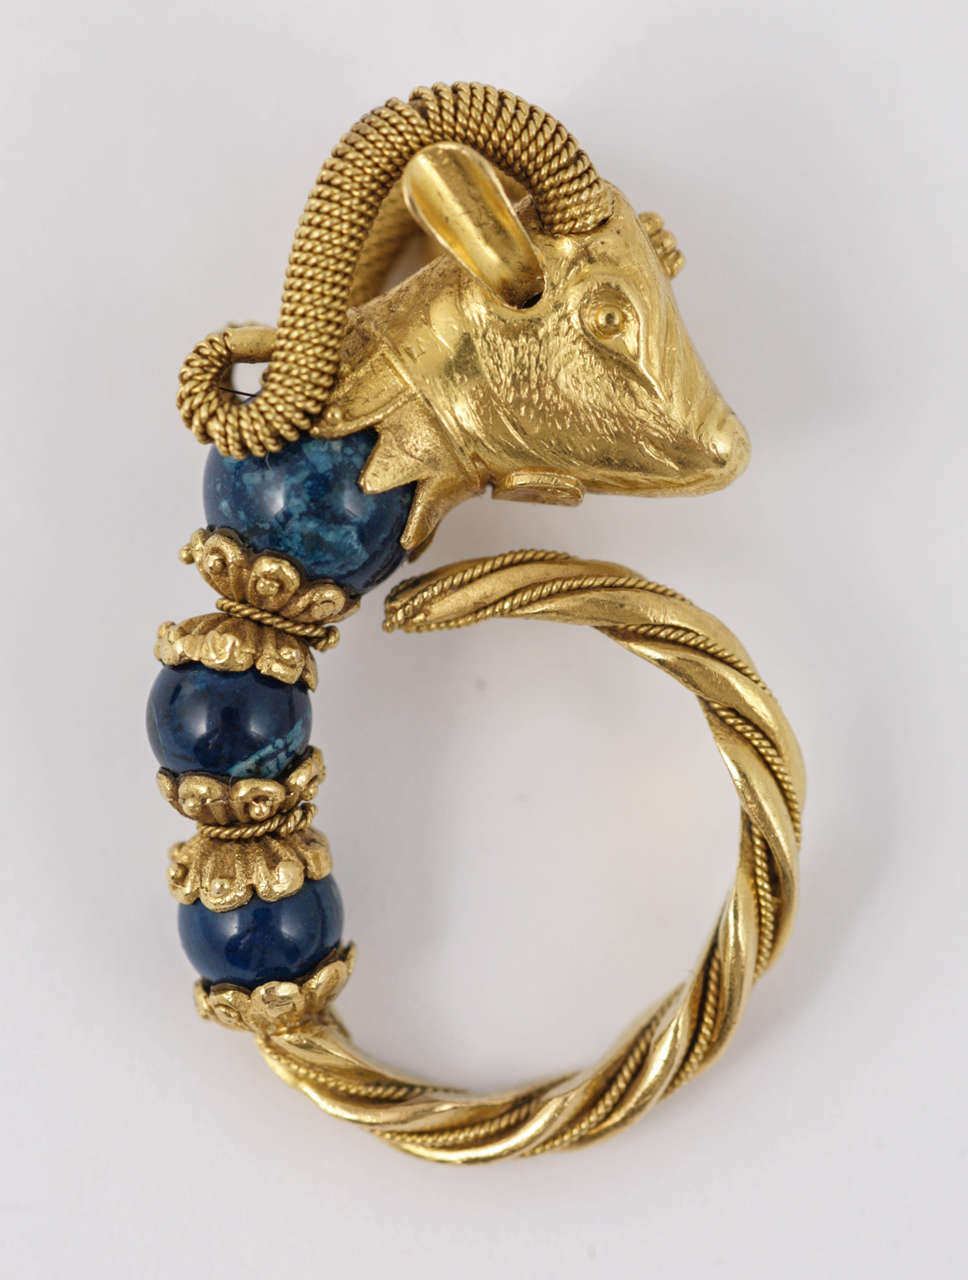 Hellenistic inspired Bull and Sodalite Ring in granulation and wirework.

High carat gold, with Maker's Marks, size (UK) J.